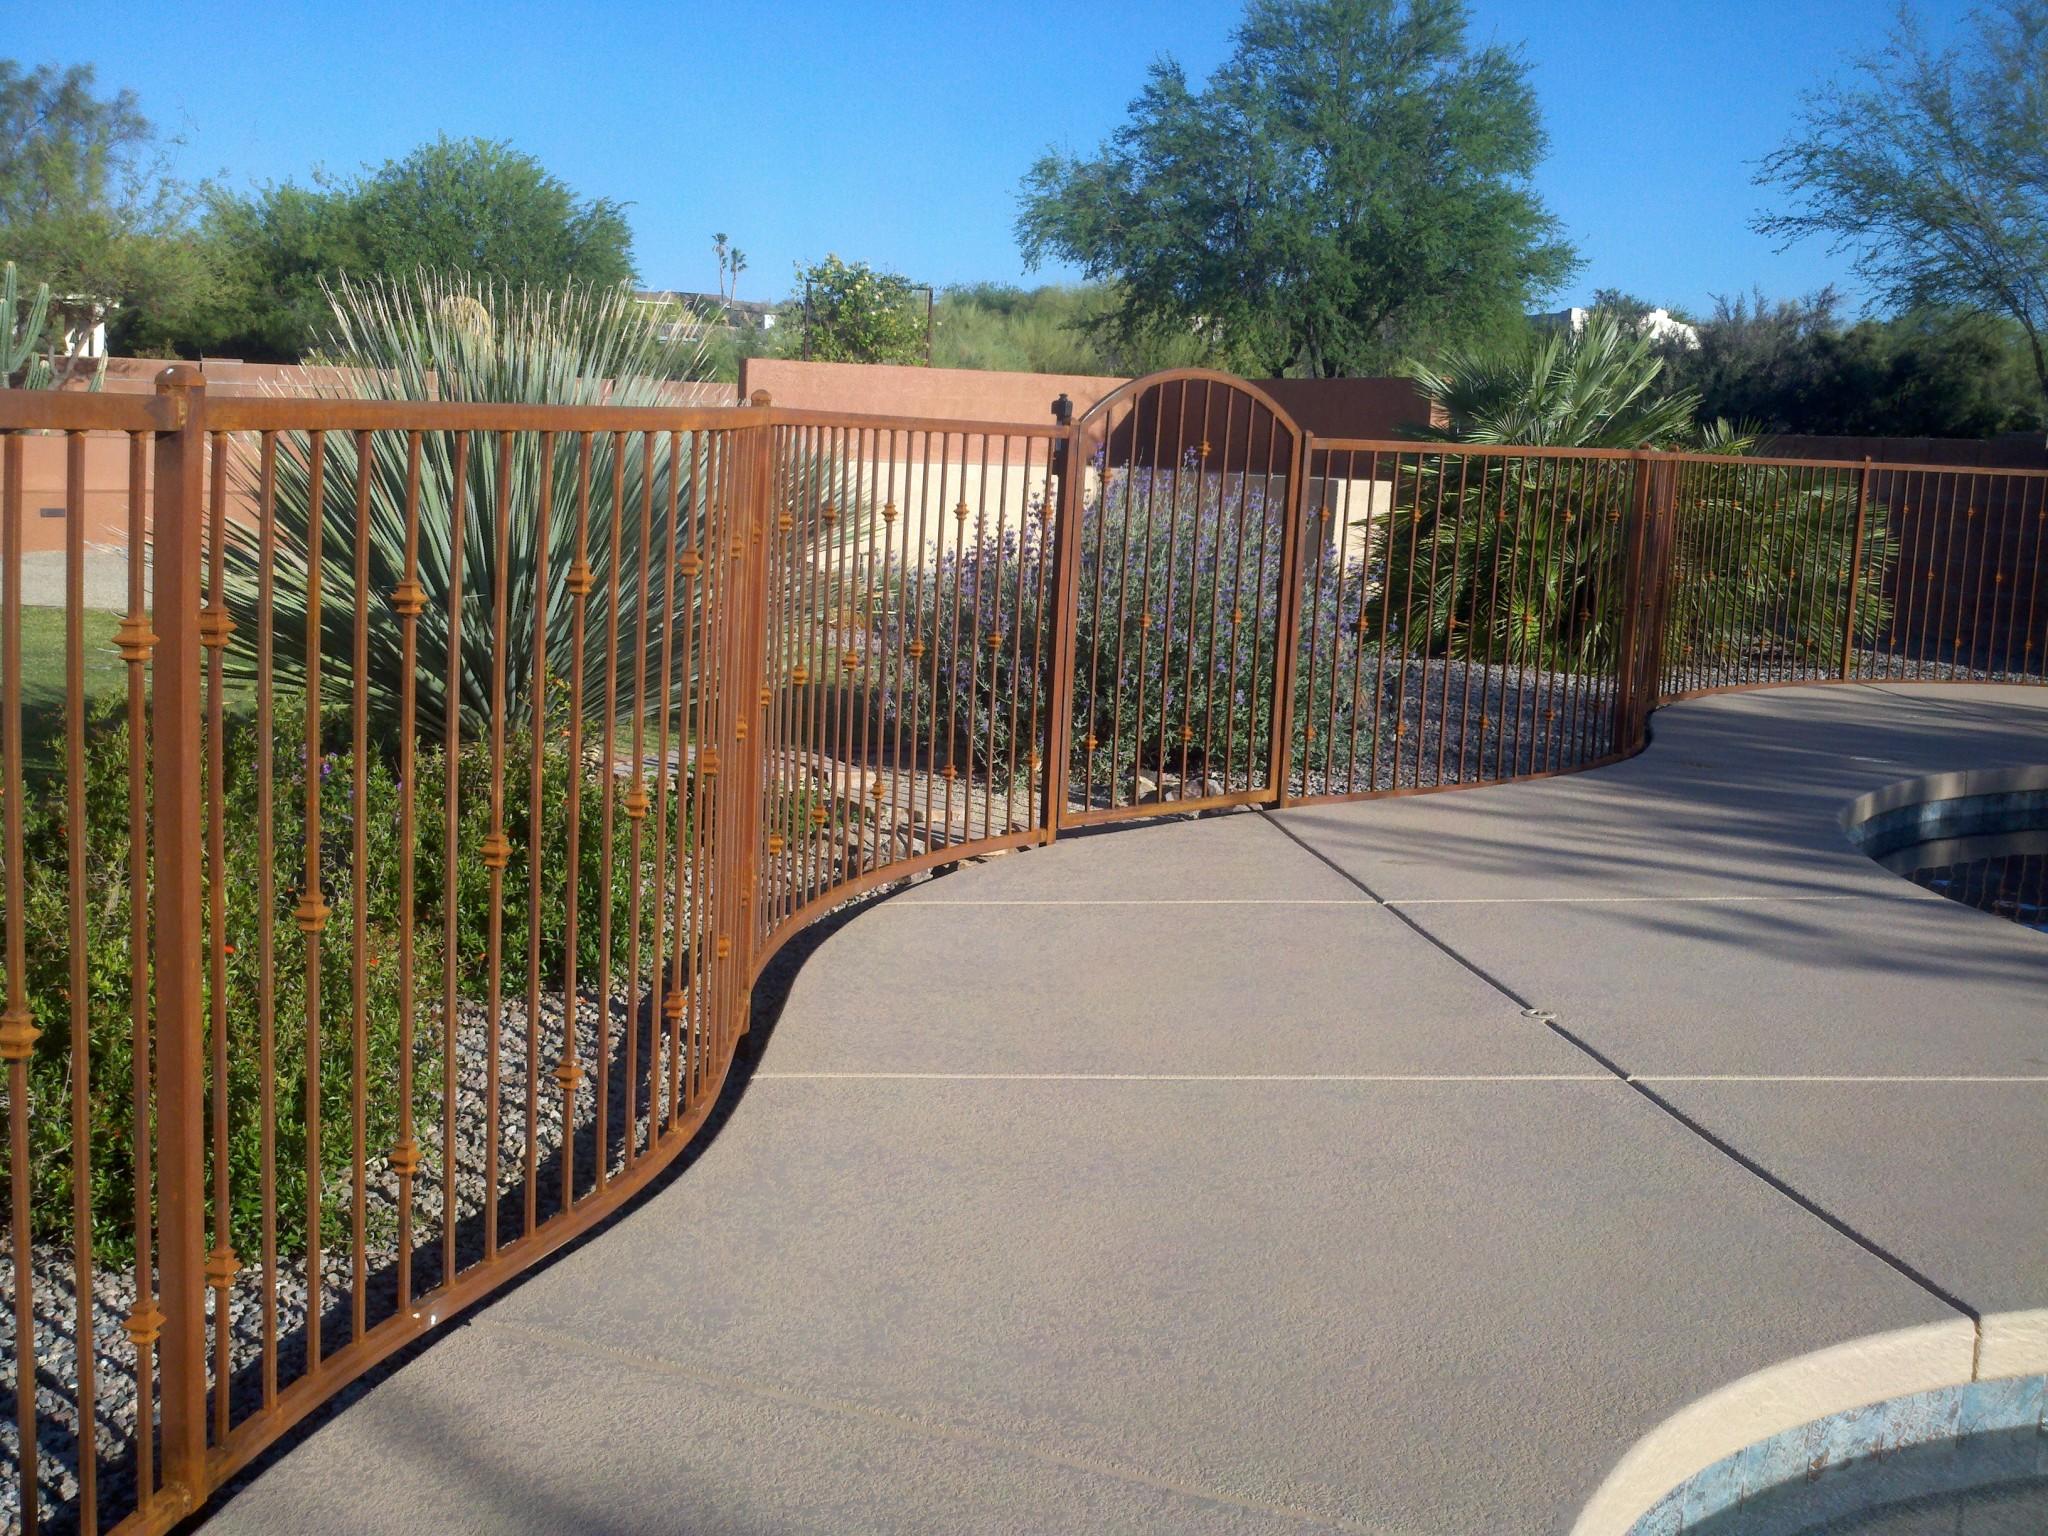 Rusted wrought iron fence with a nice S curve and knuckles IF115-2 K